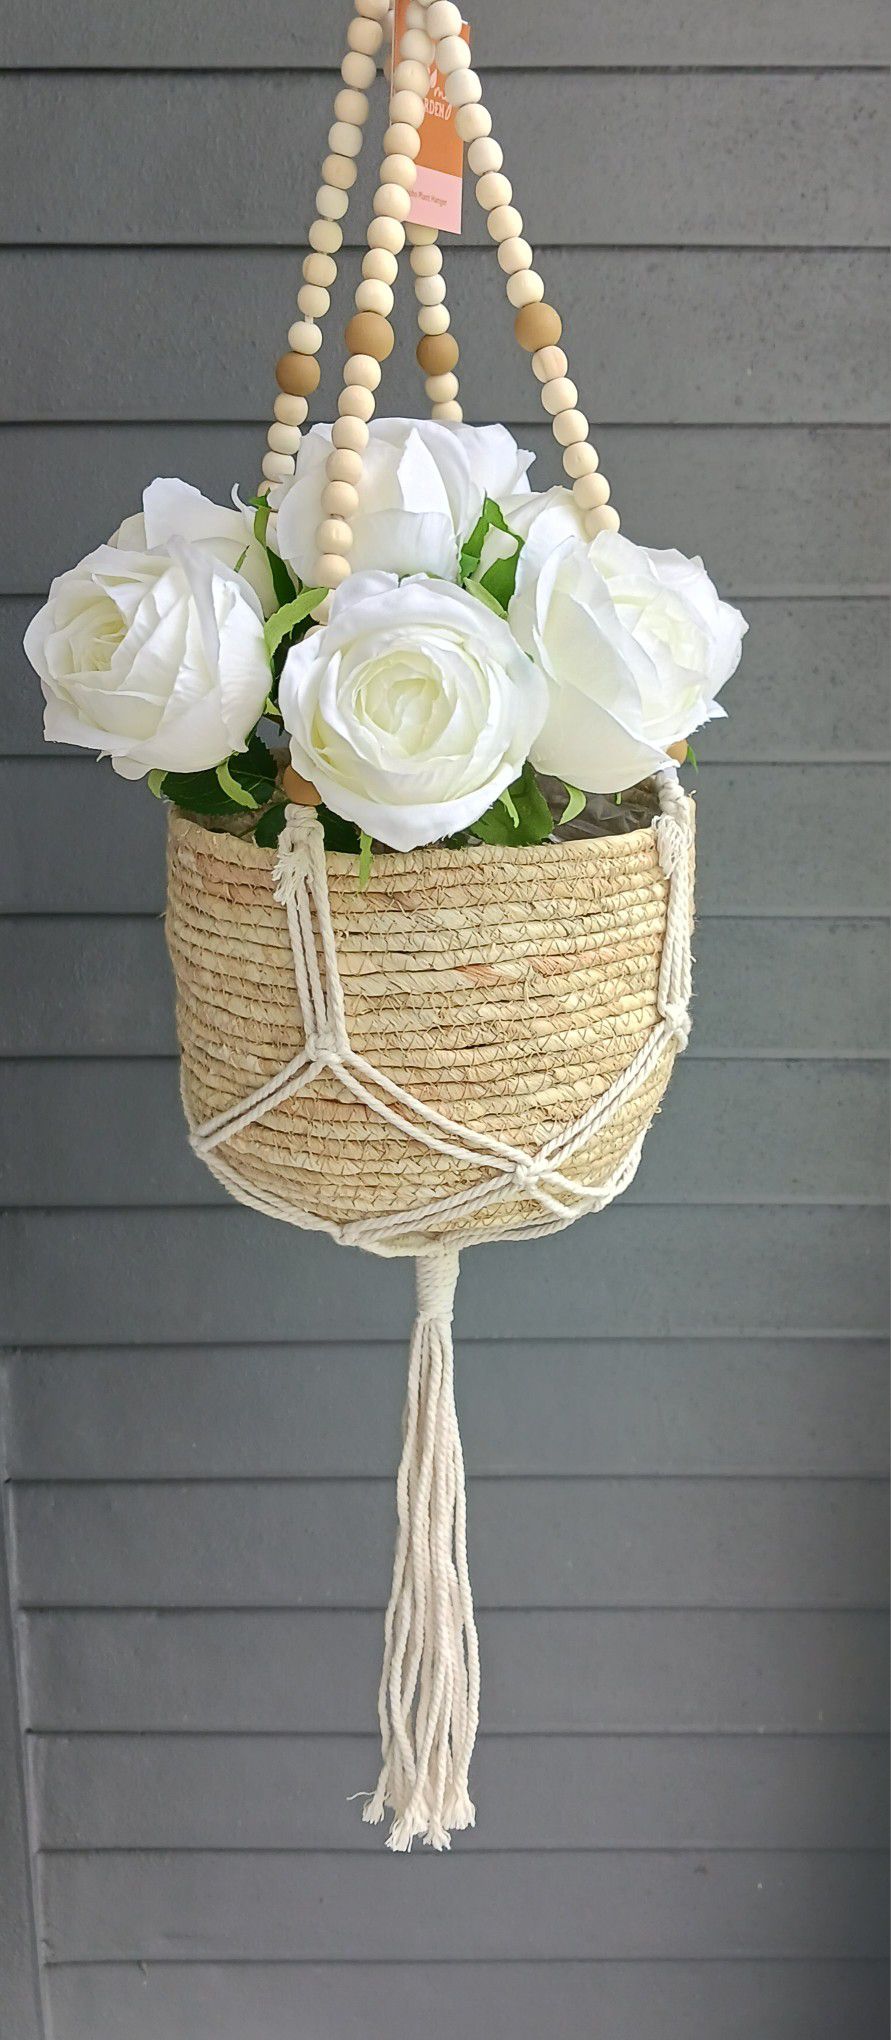 New plant hanger with wicker pot & 10 roses included